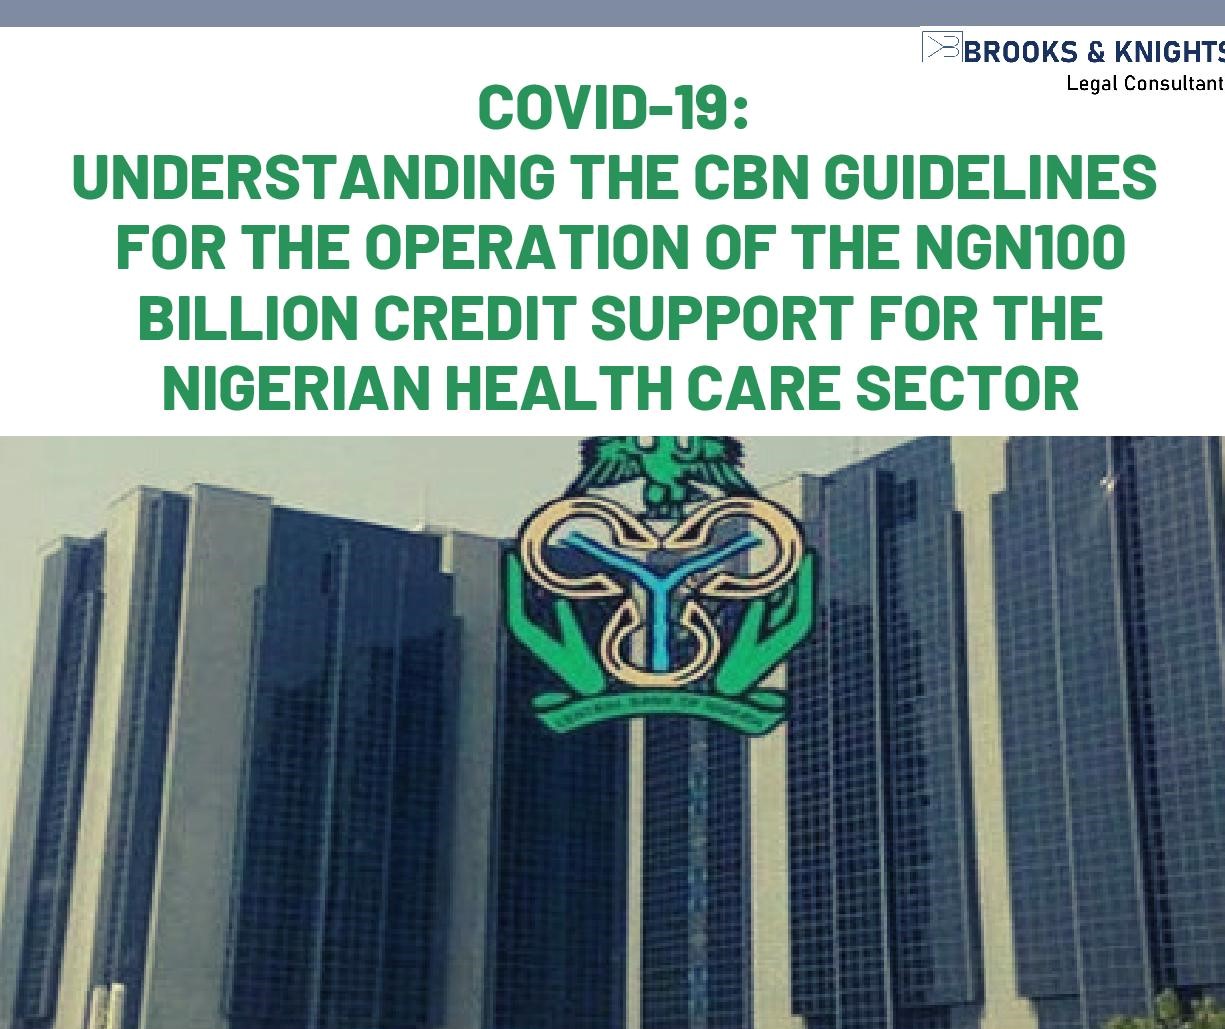 COVID-19: Understanding the CBN Guidelines For the Operation of the NGN100 Billion Credit Support for the Nigerian Healthcare Sector